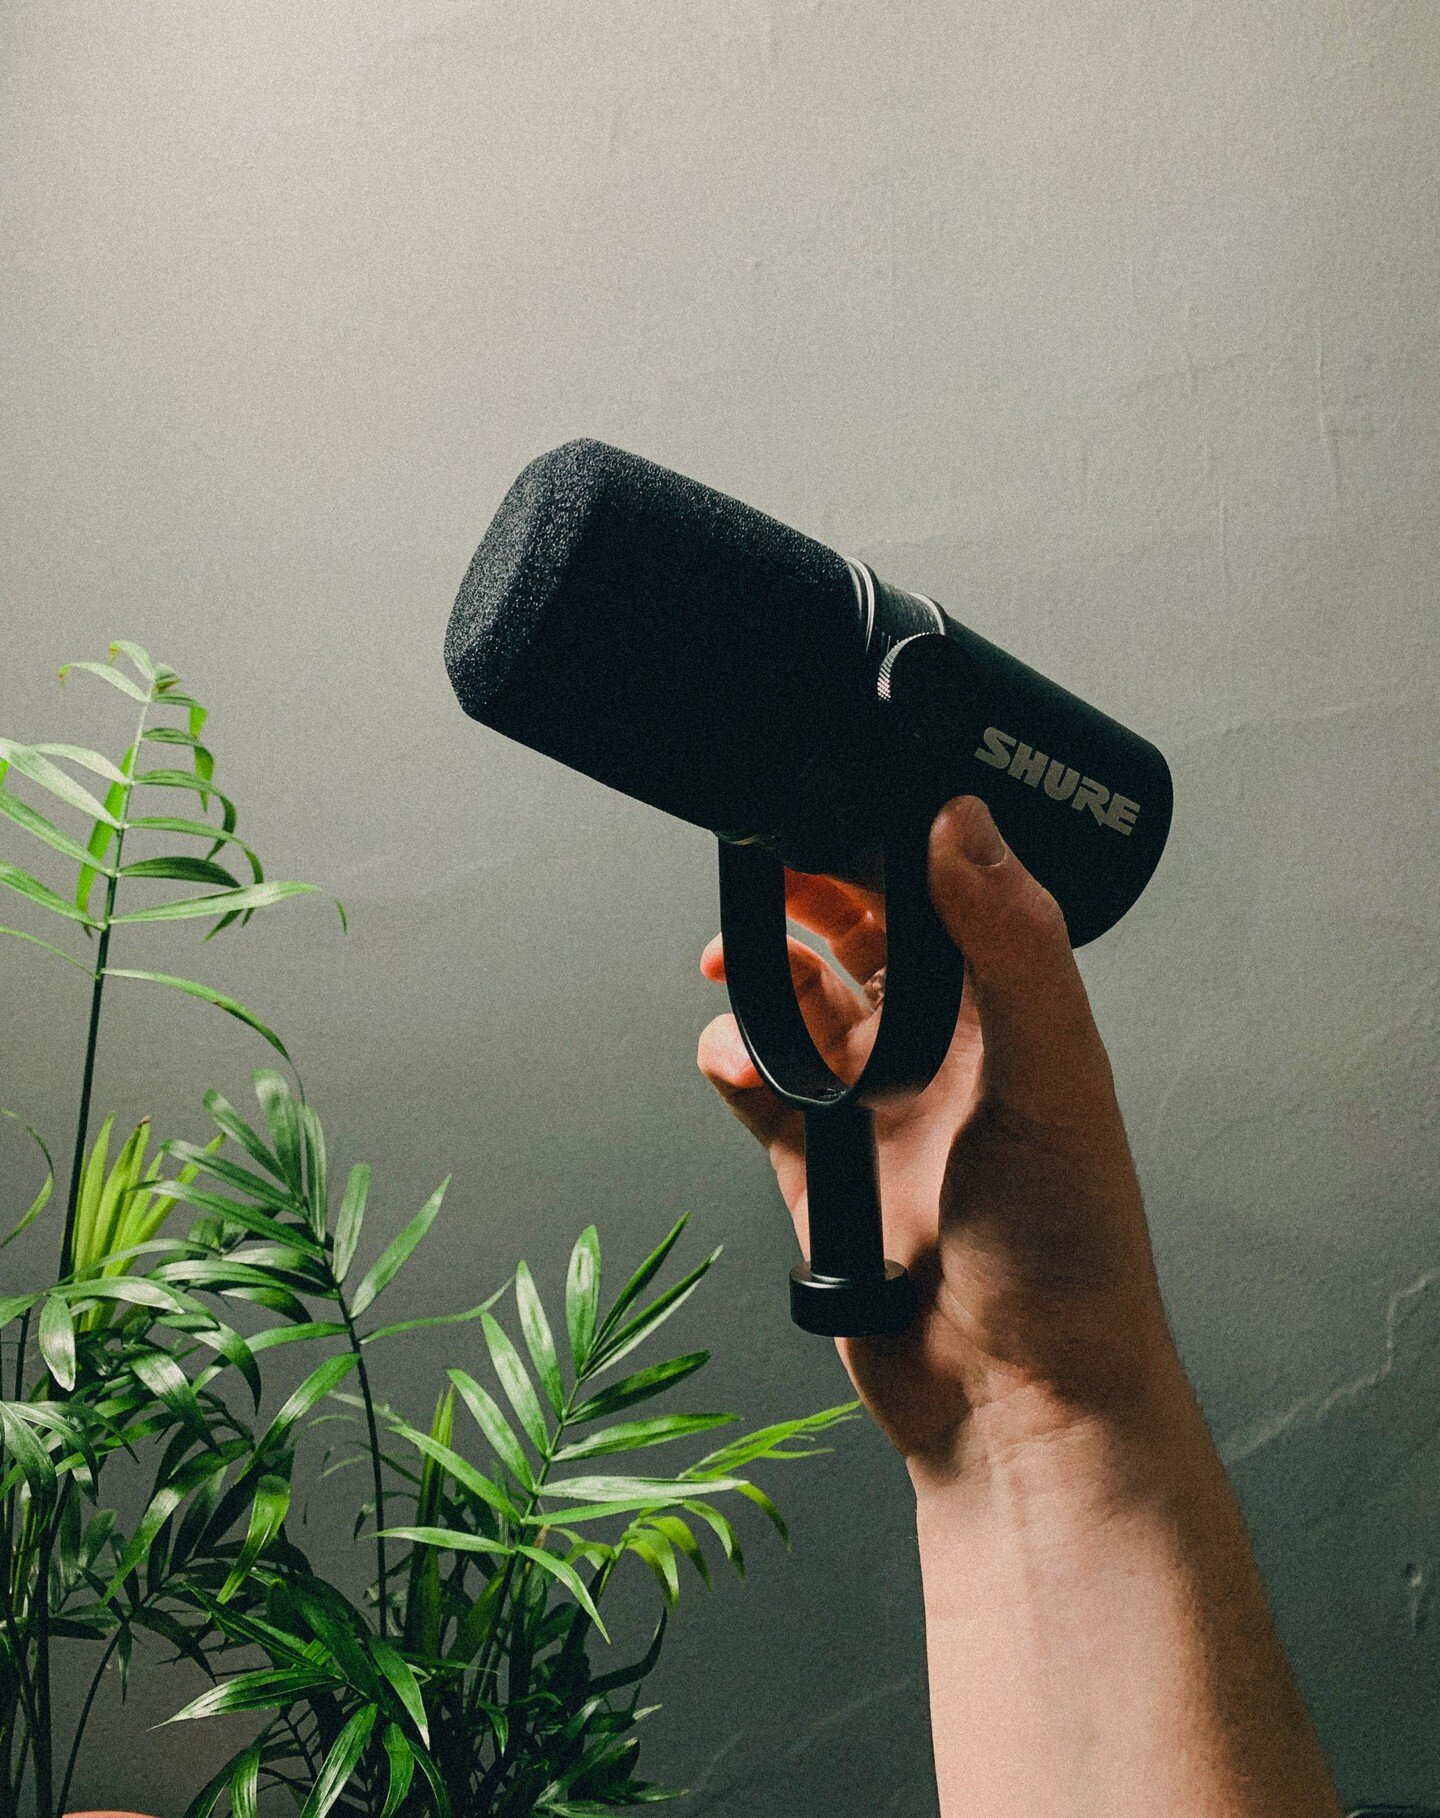 Our new favourite #podcastmic, podcast are a great way to establish yourself as an expert in your field. 
-
-
#shure#microphone#shuremicrophones #podcast #podcastlife #podcaster #podcastersofinstagram #videopodcast #marketingtips #dailymarketing #mv7